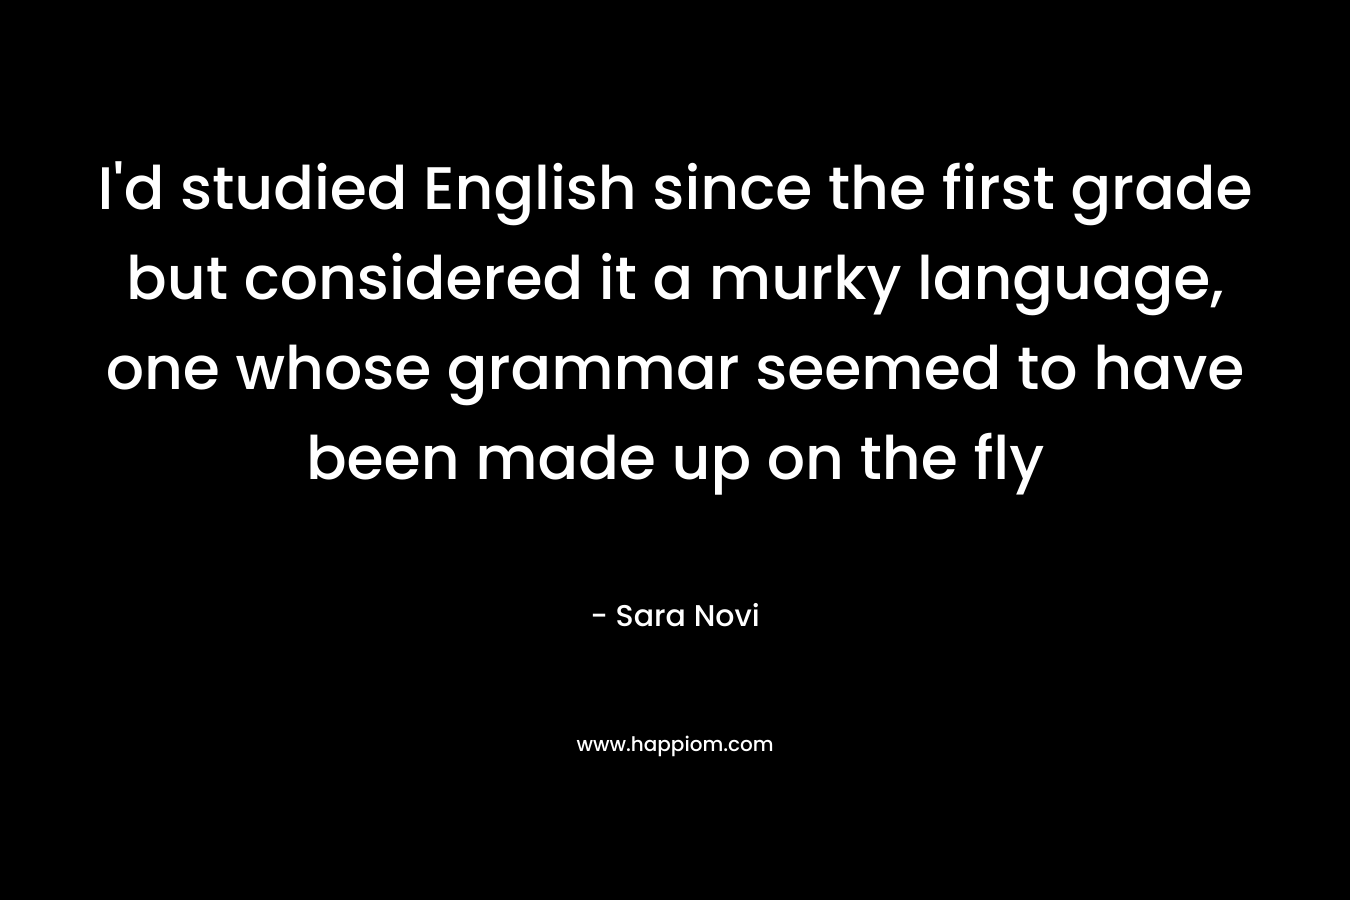 I’d studied English since the first grade but considered it a murky language, one whose grammar seemed to have been made up on the fly – Sara Novi